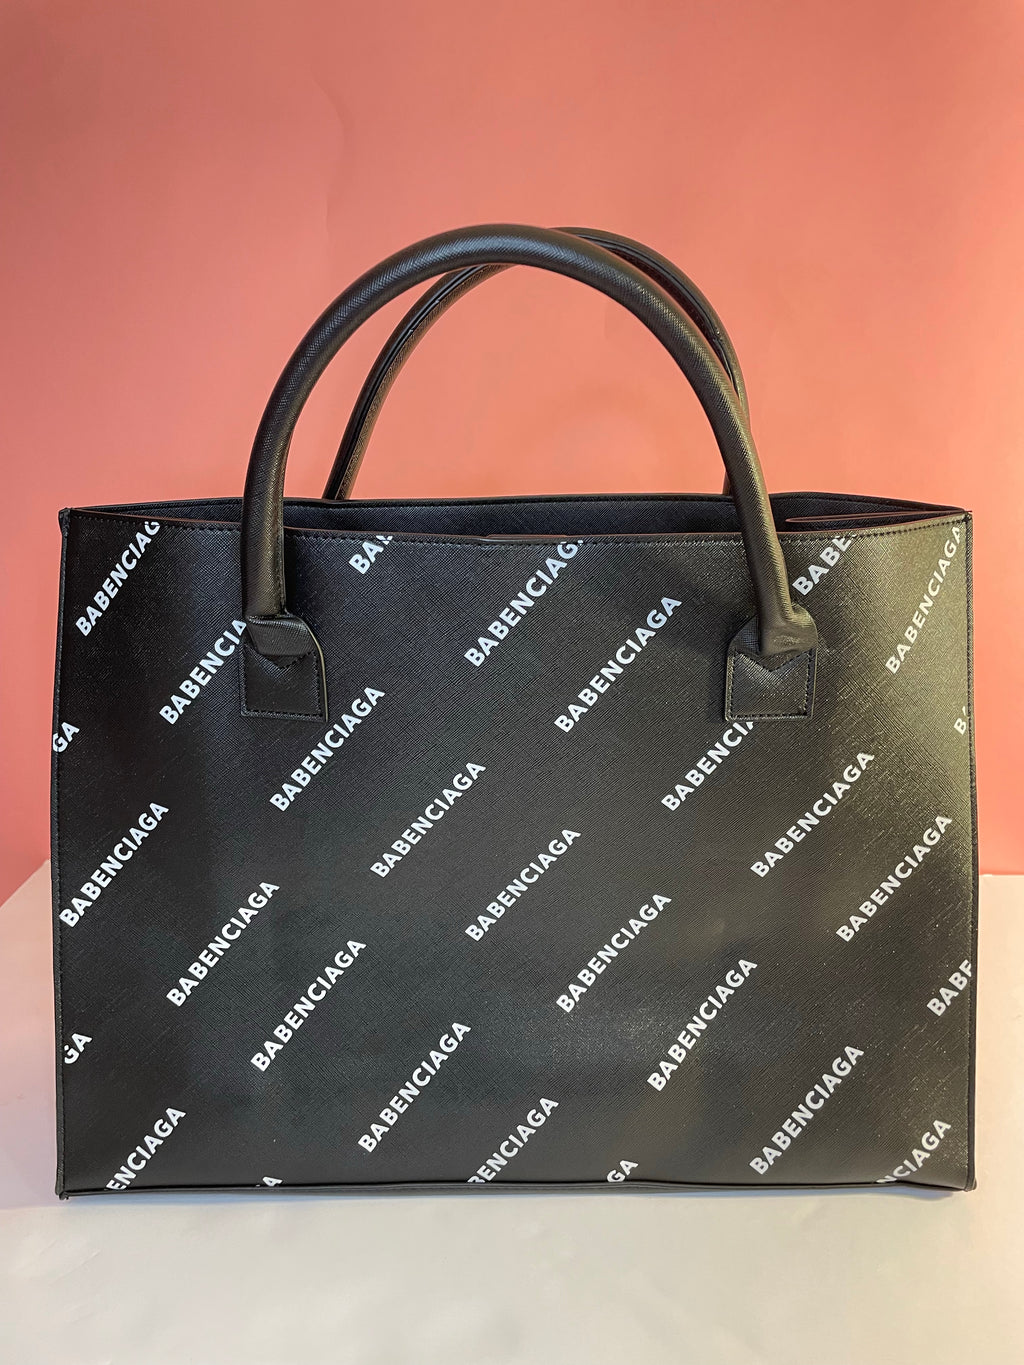 J. ELISE BOUTIQUE luxurious 100% textured vegan leather black babenciaga all over  fashion tote. Metal clasp. Durable exterior. Easy product care.  A timeless silhouette.  